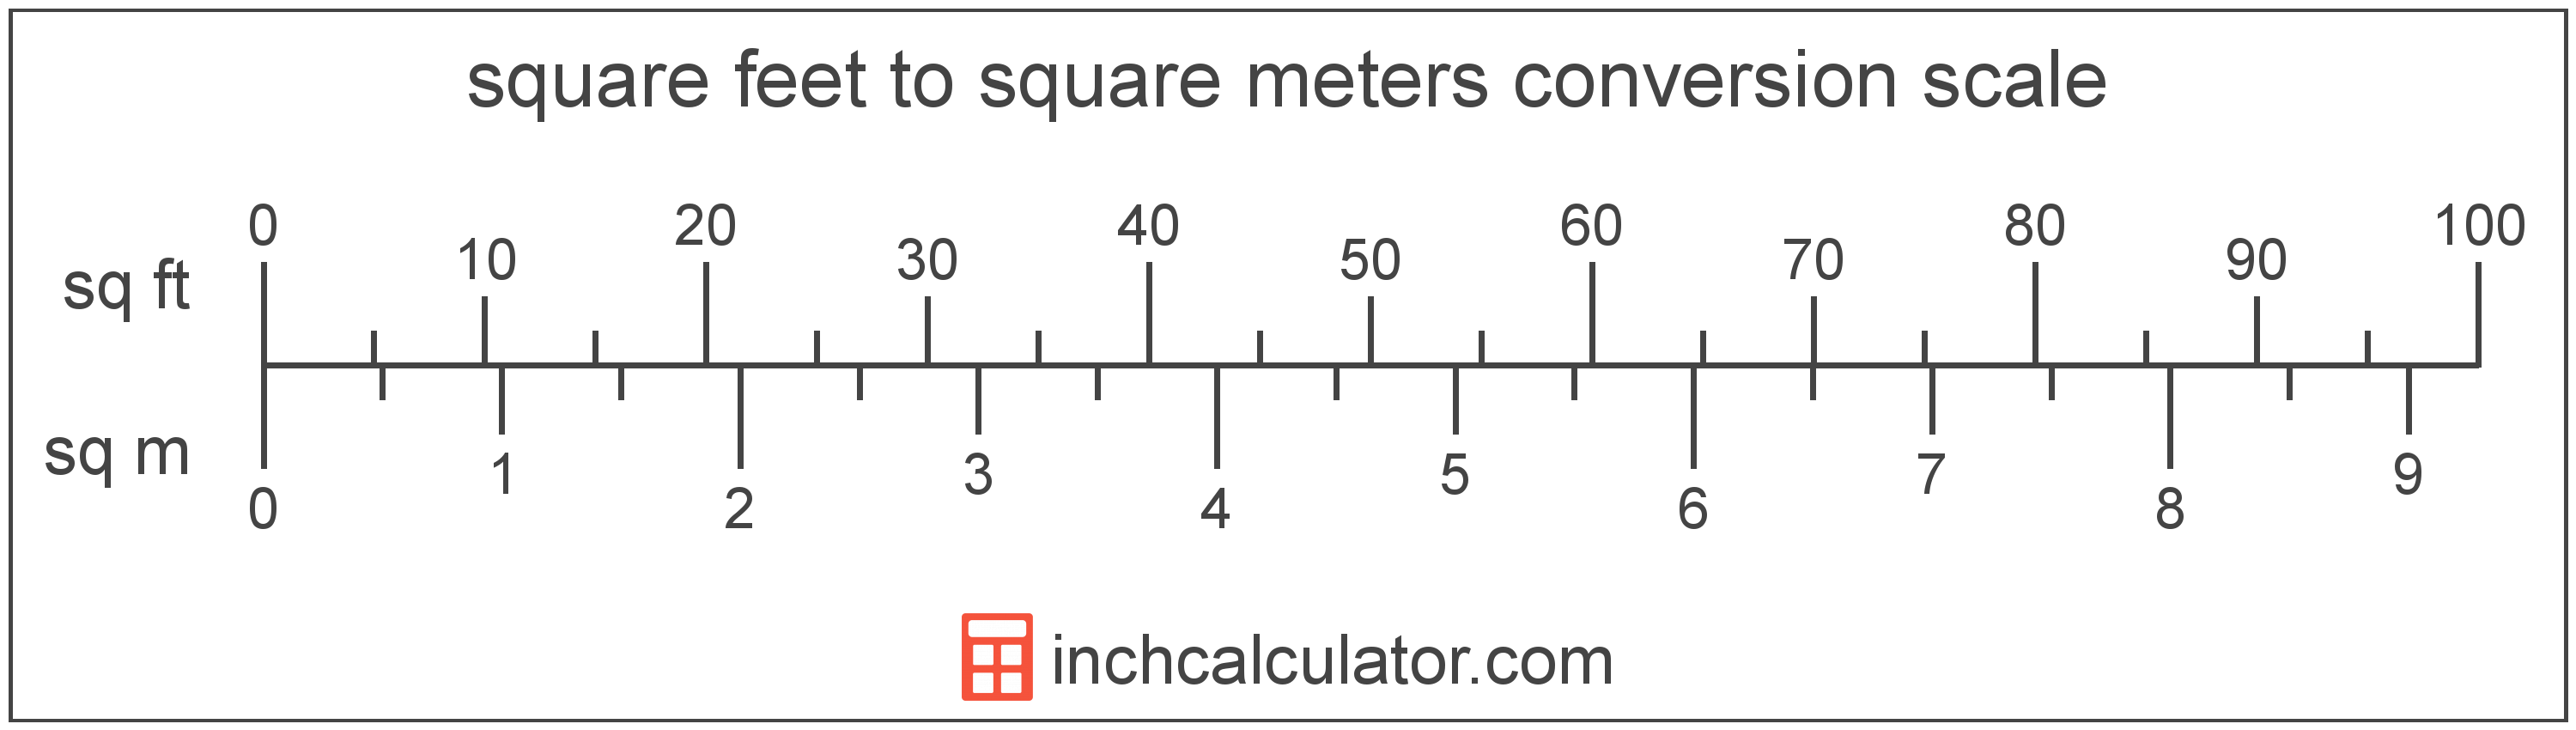 Square Meters to Square Feet Conversion (sq m to sq ft)